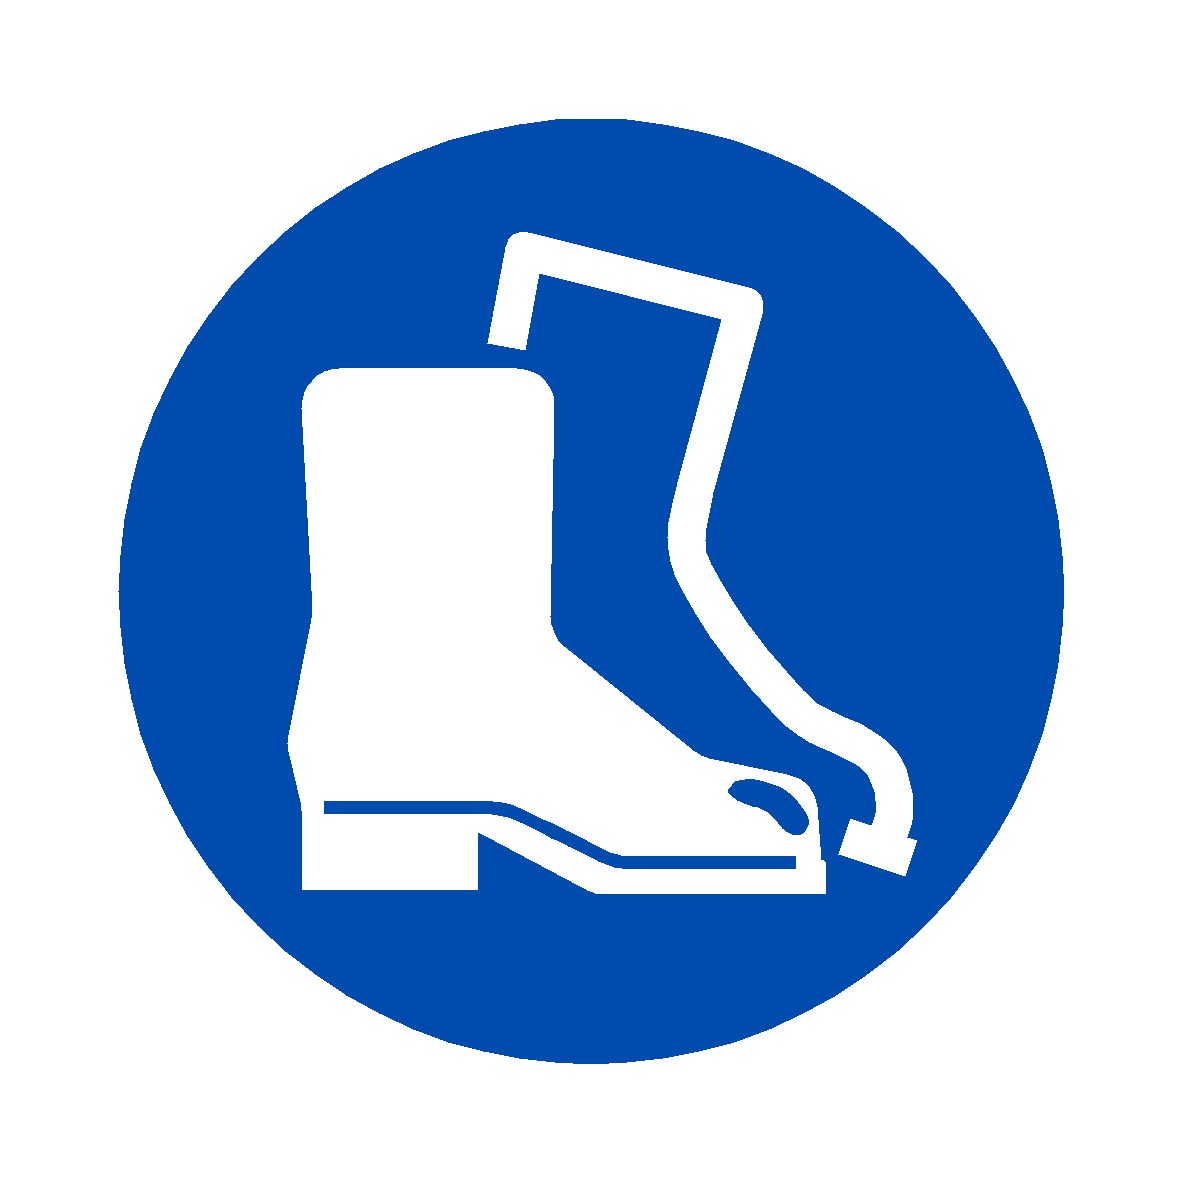 Foot protection signs